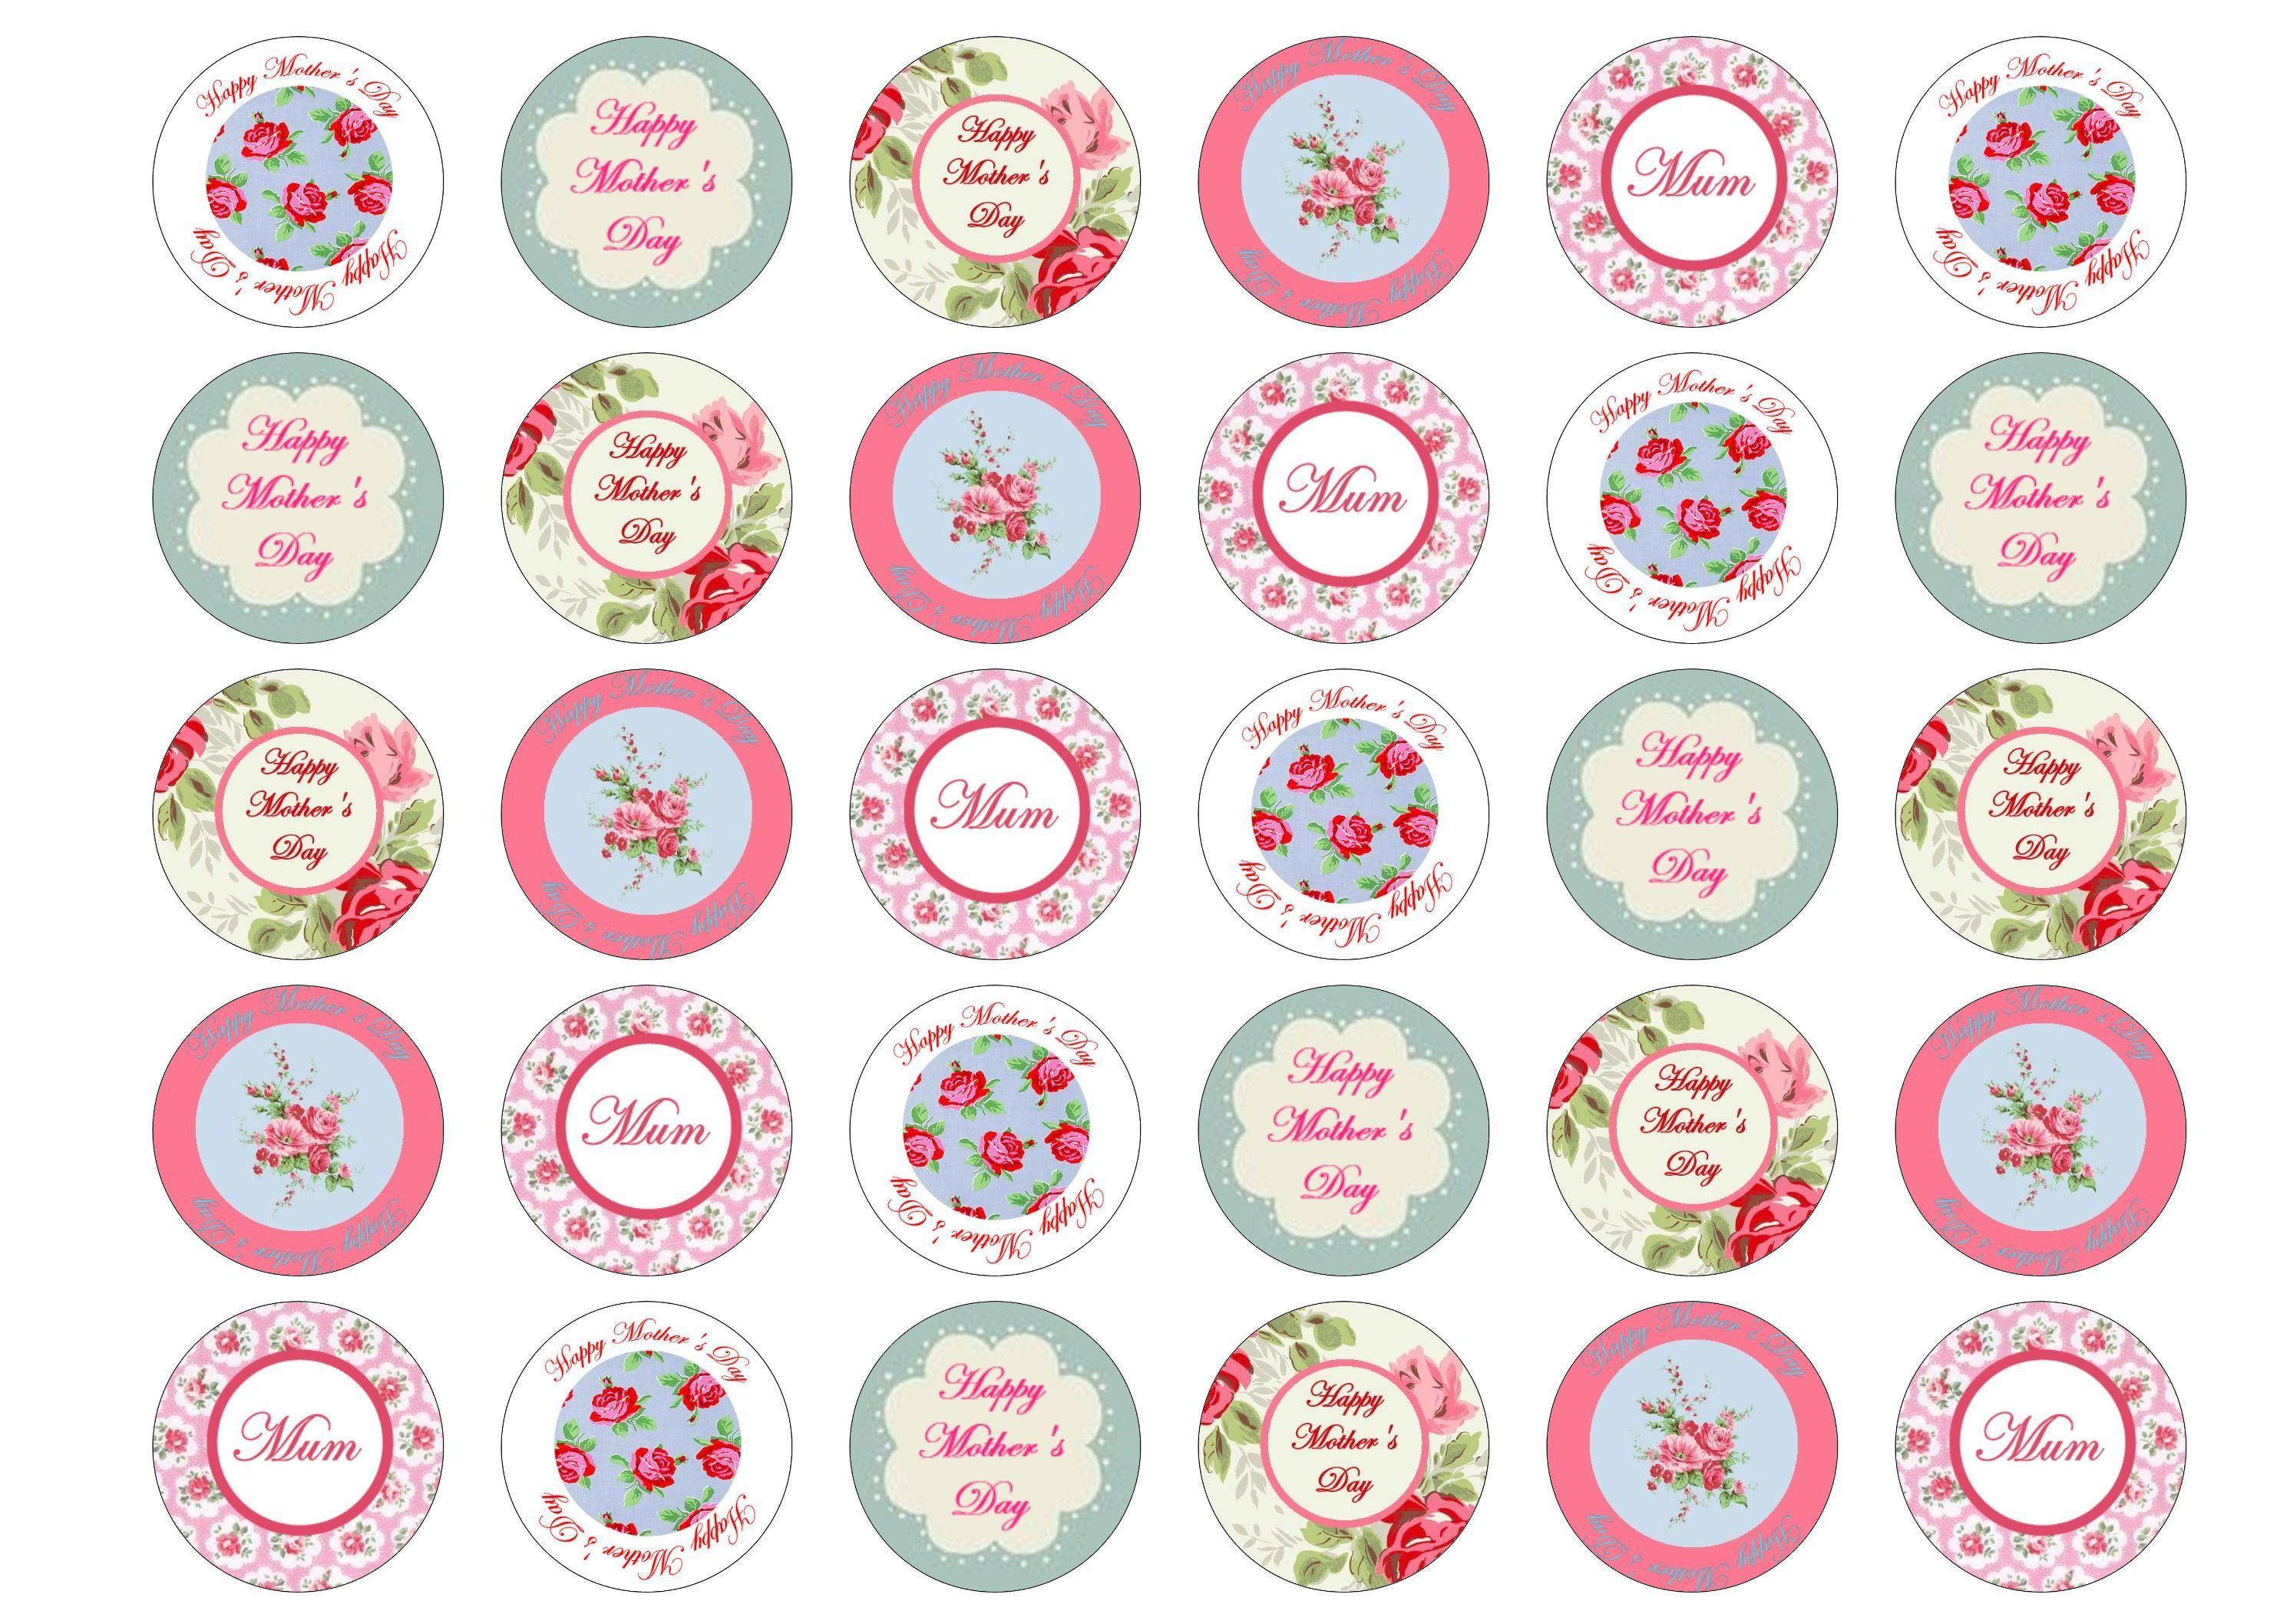 Printed edible cupcake toppers for Mother's Day